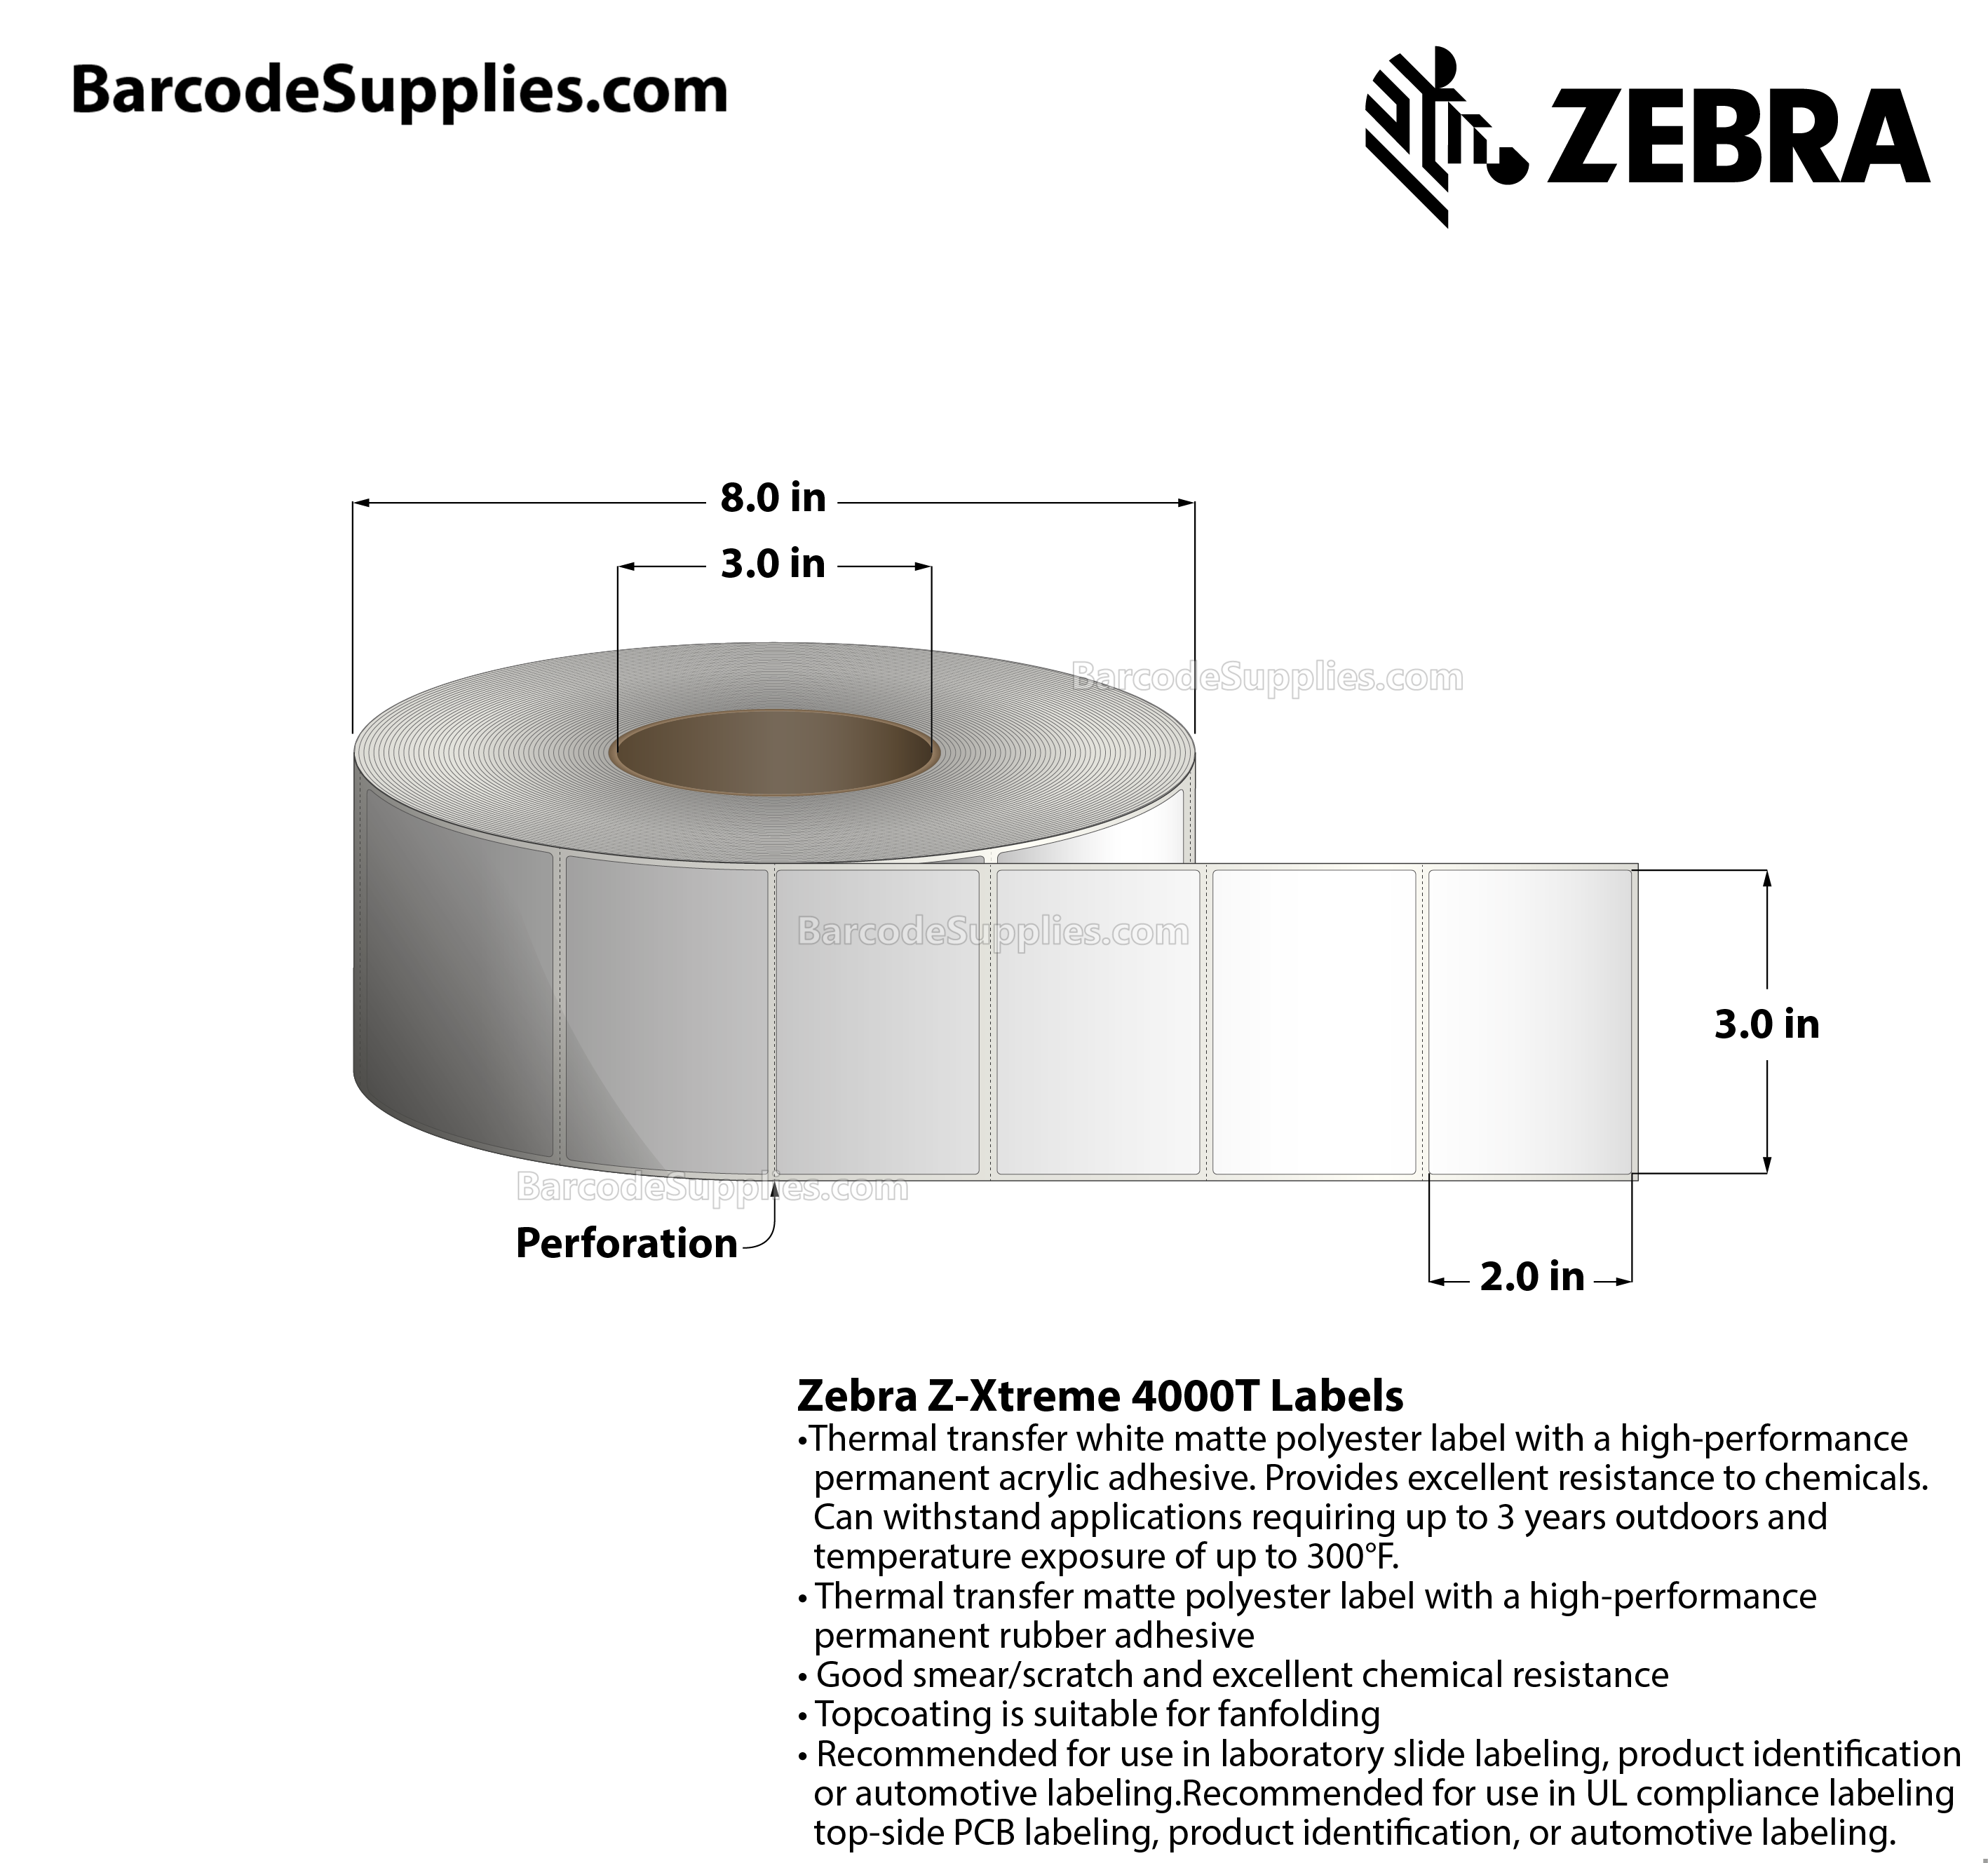 3 x 2 Thermal Transfer White Z-Xtreme 4000T White Labels With Permanent Adhesive - Perforated - 1000 Labels Per Roll - Carton Of 1 Rolls - 1000 Labels Total - MPN: 10023165